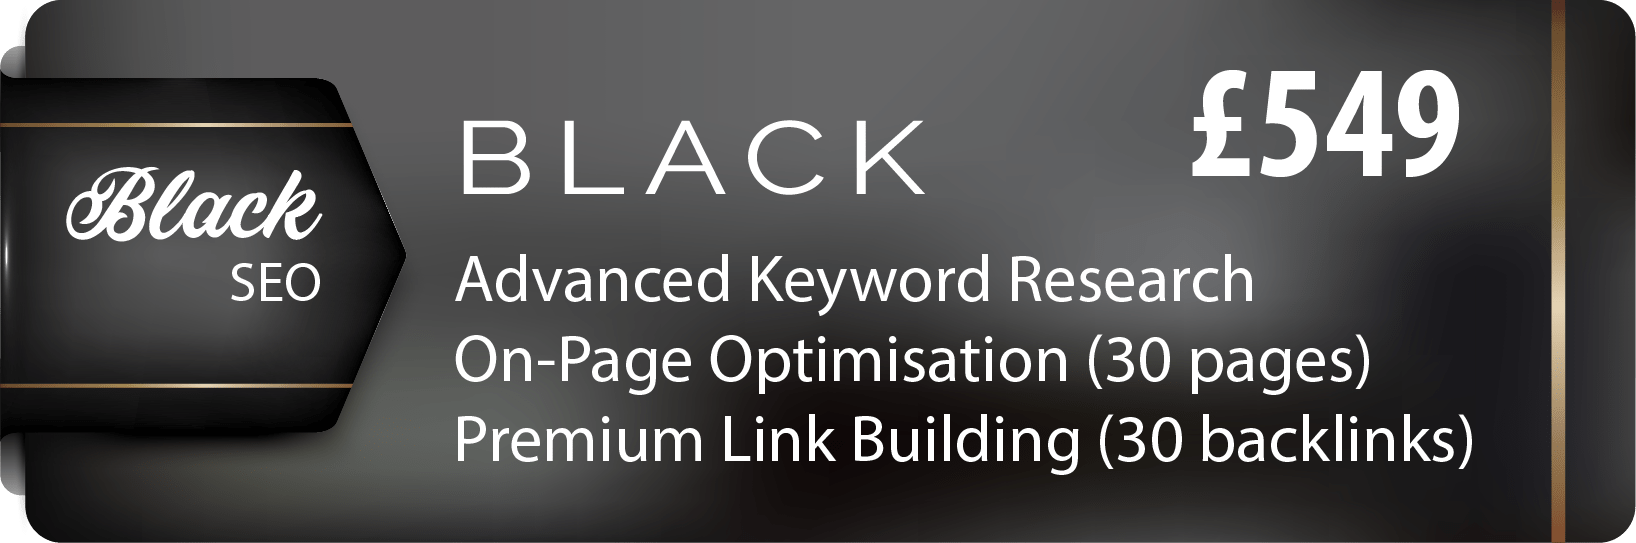 Black value for SEO package for websites based in Hampshire